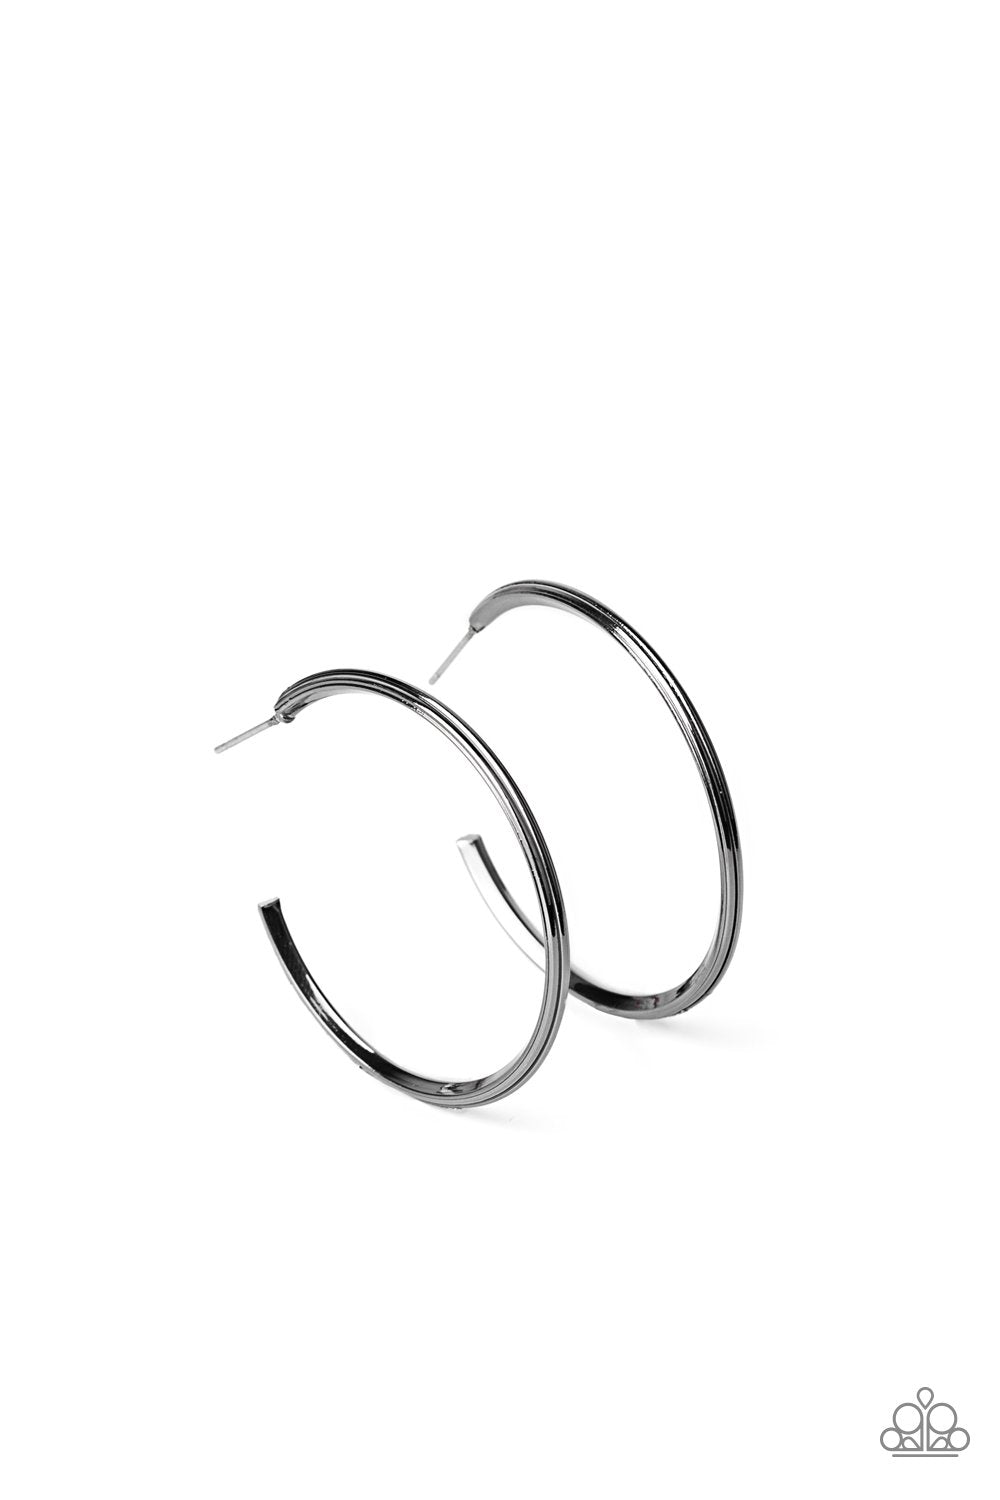 Chic As Can Be Gunmetal Black Hoop Earrings - Paparazzi Accessories- lightbox - CarasShop.com - $5 Jewelry by Cara Jewels